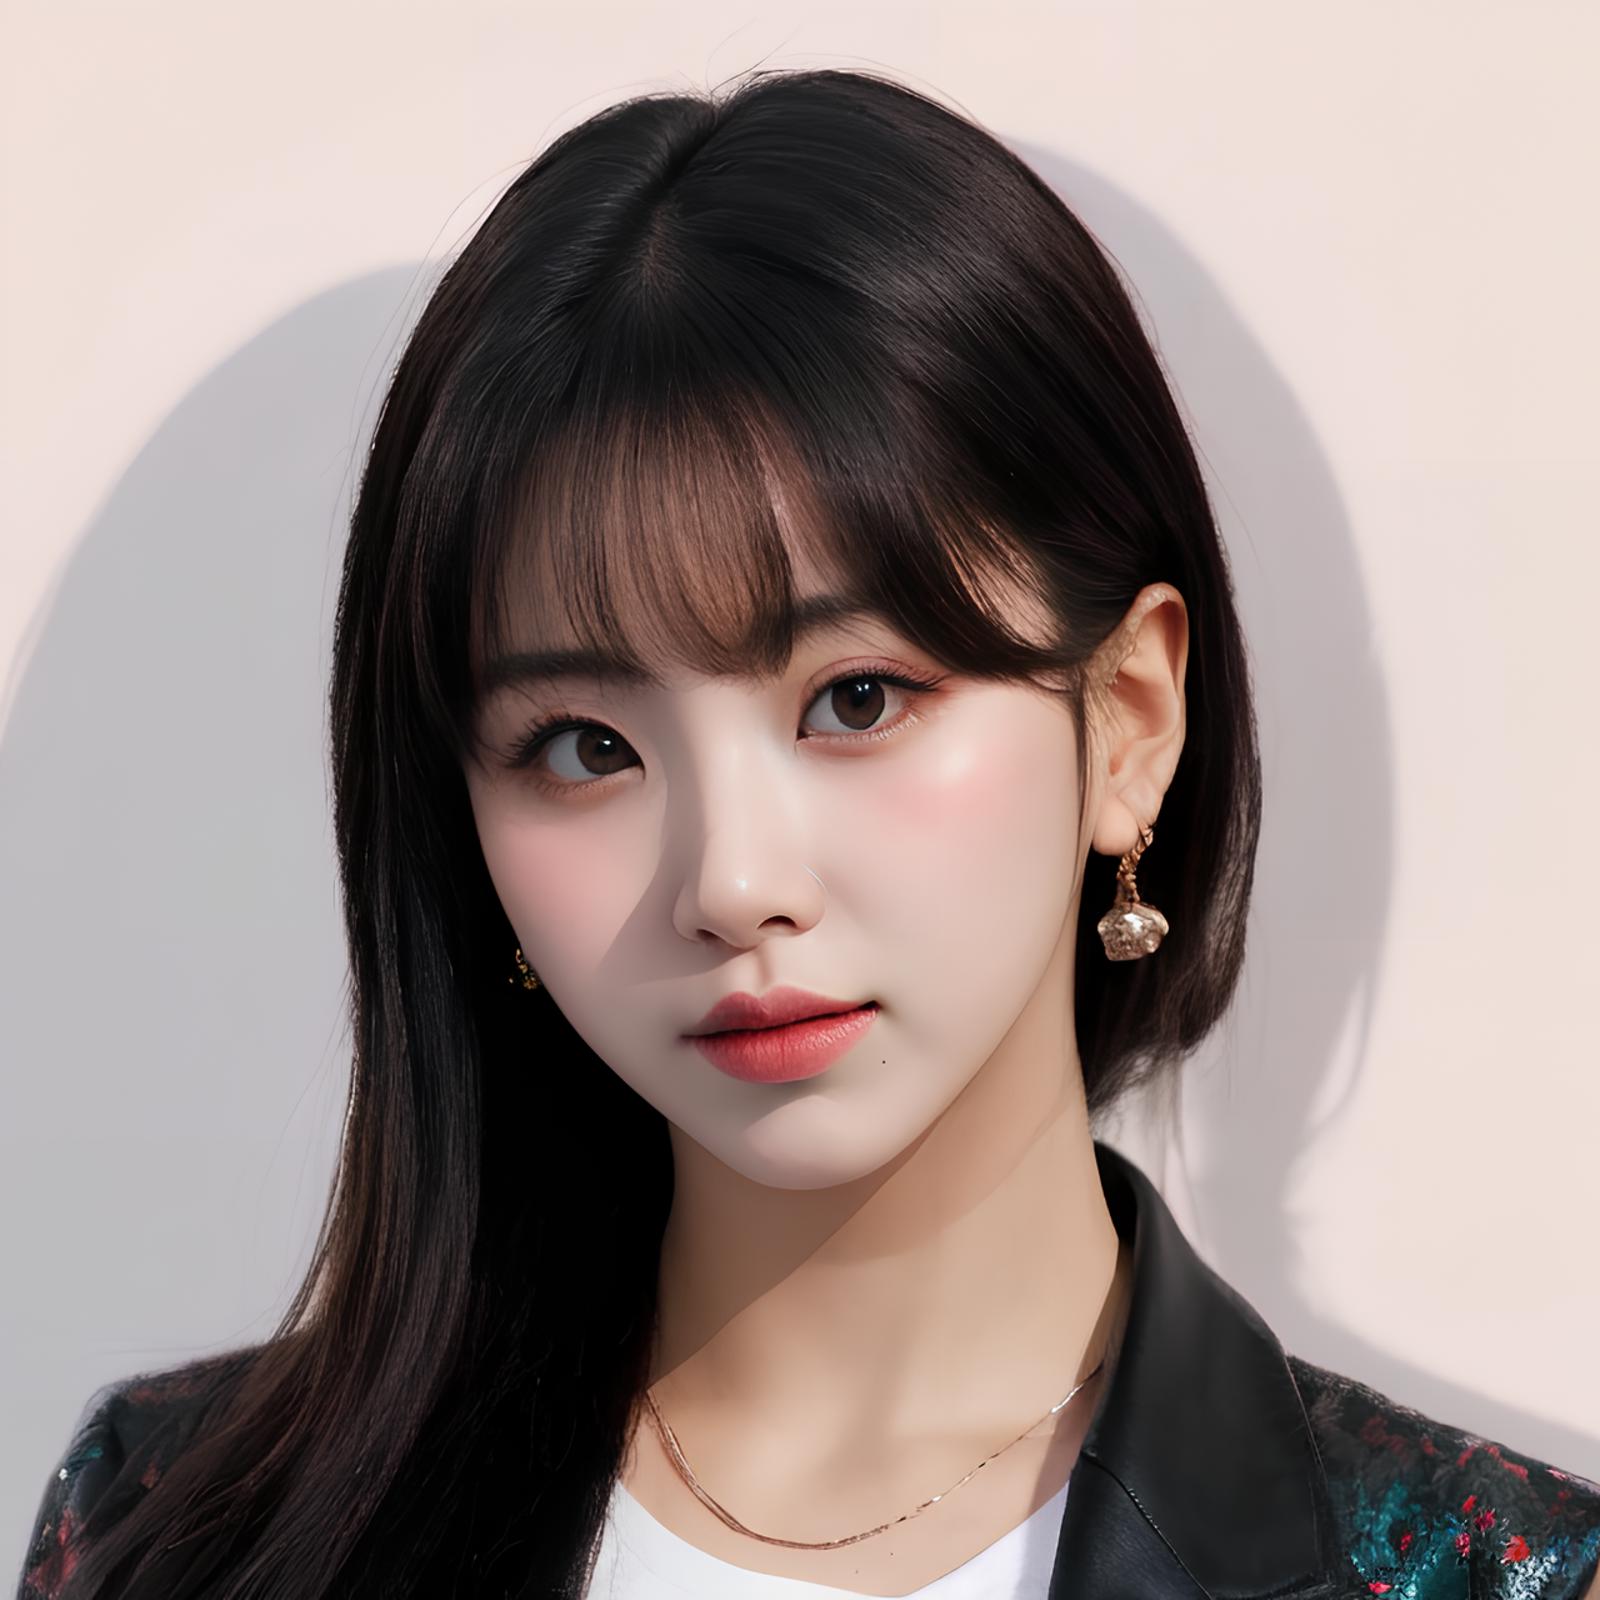 Not Twice - Chaeyoung image by Tissue_AI